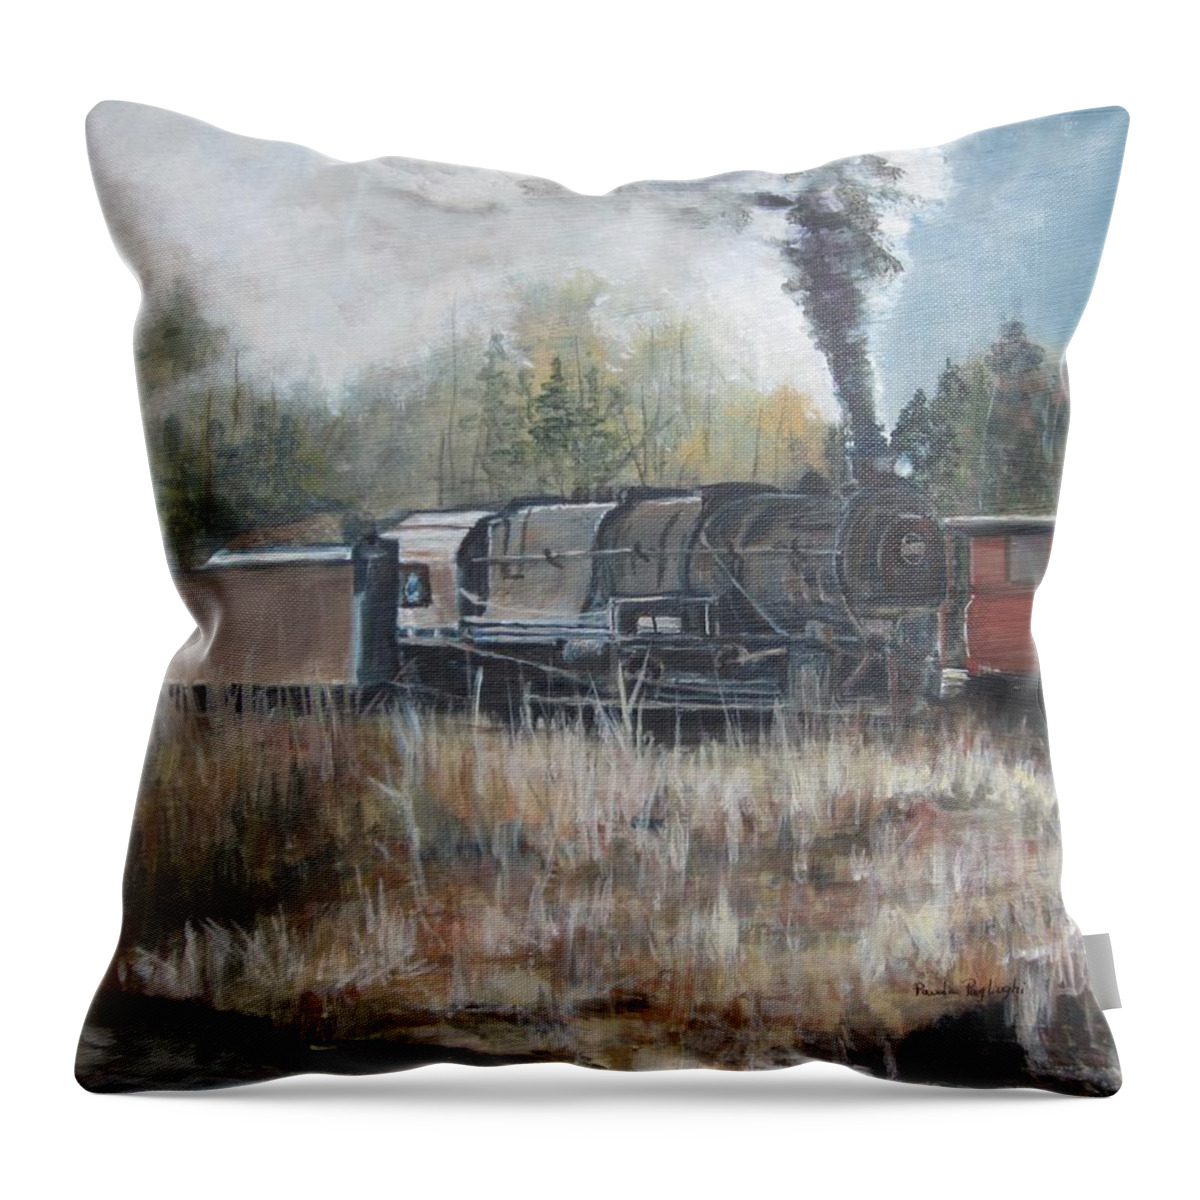 Painting Throw Pillow featuring the painting Letting Off Steam by Paula Pagliughi